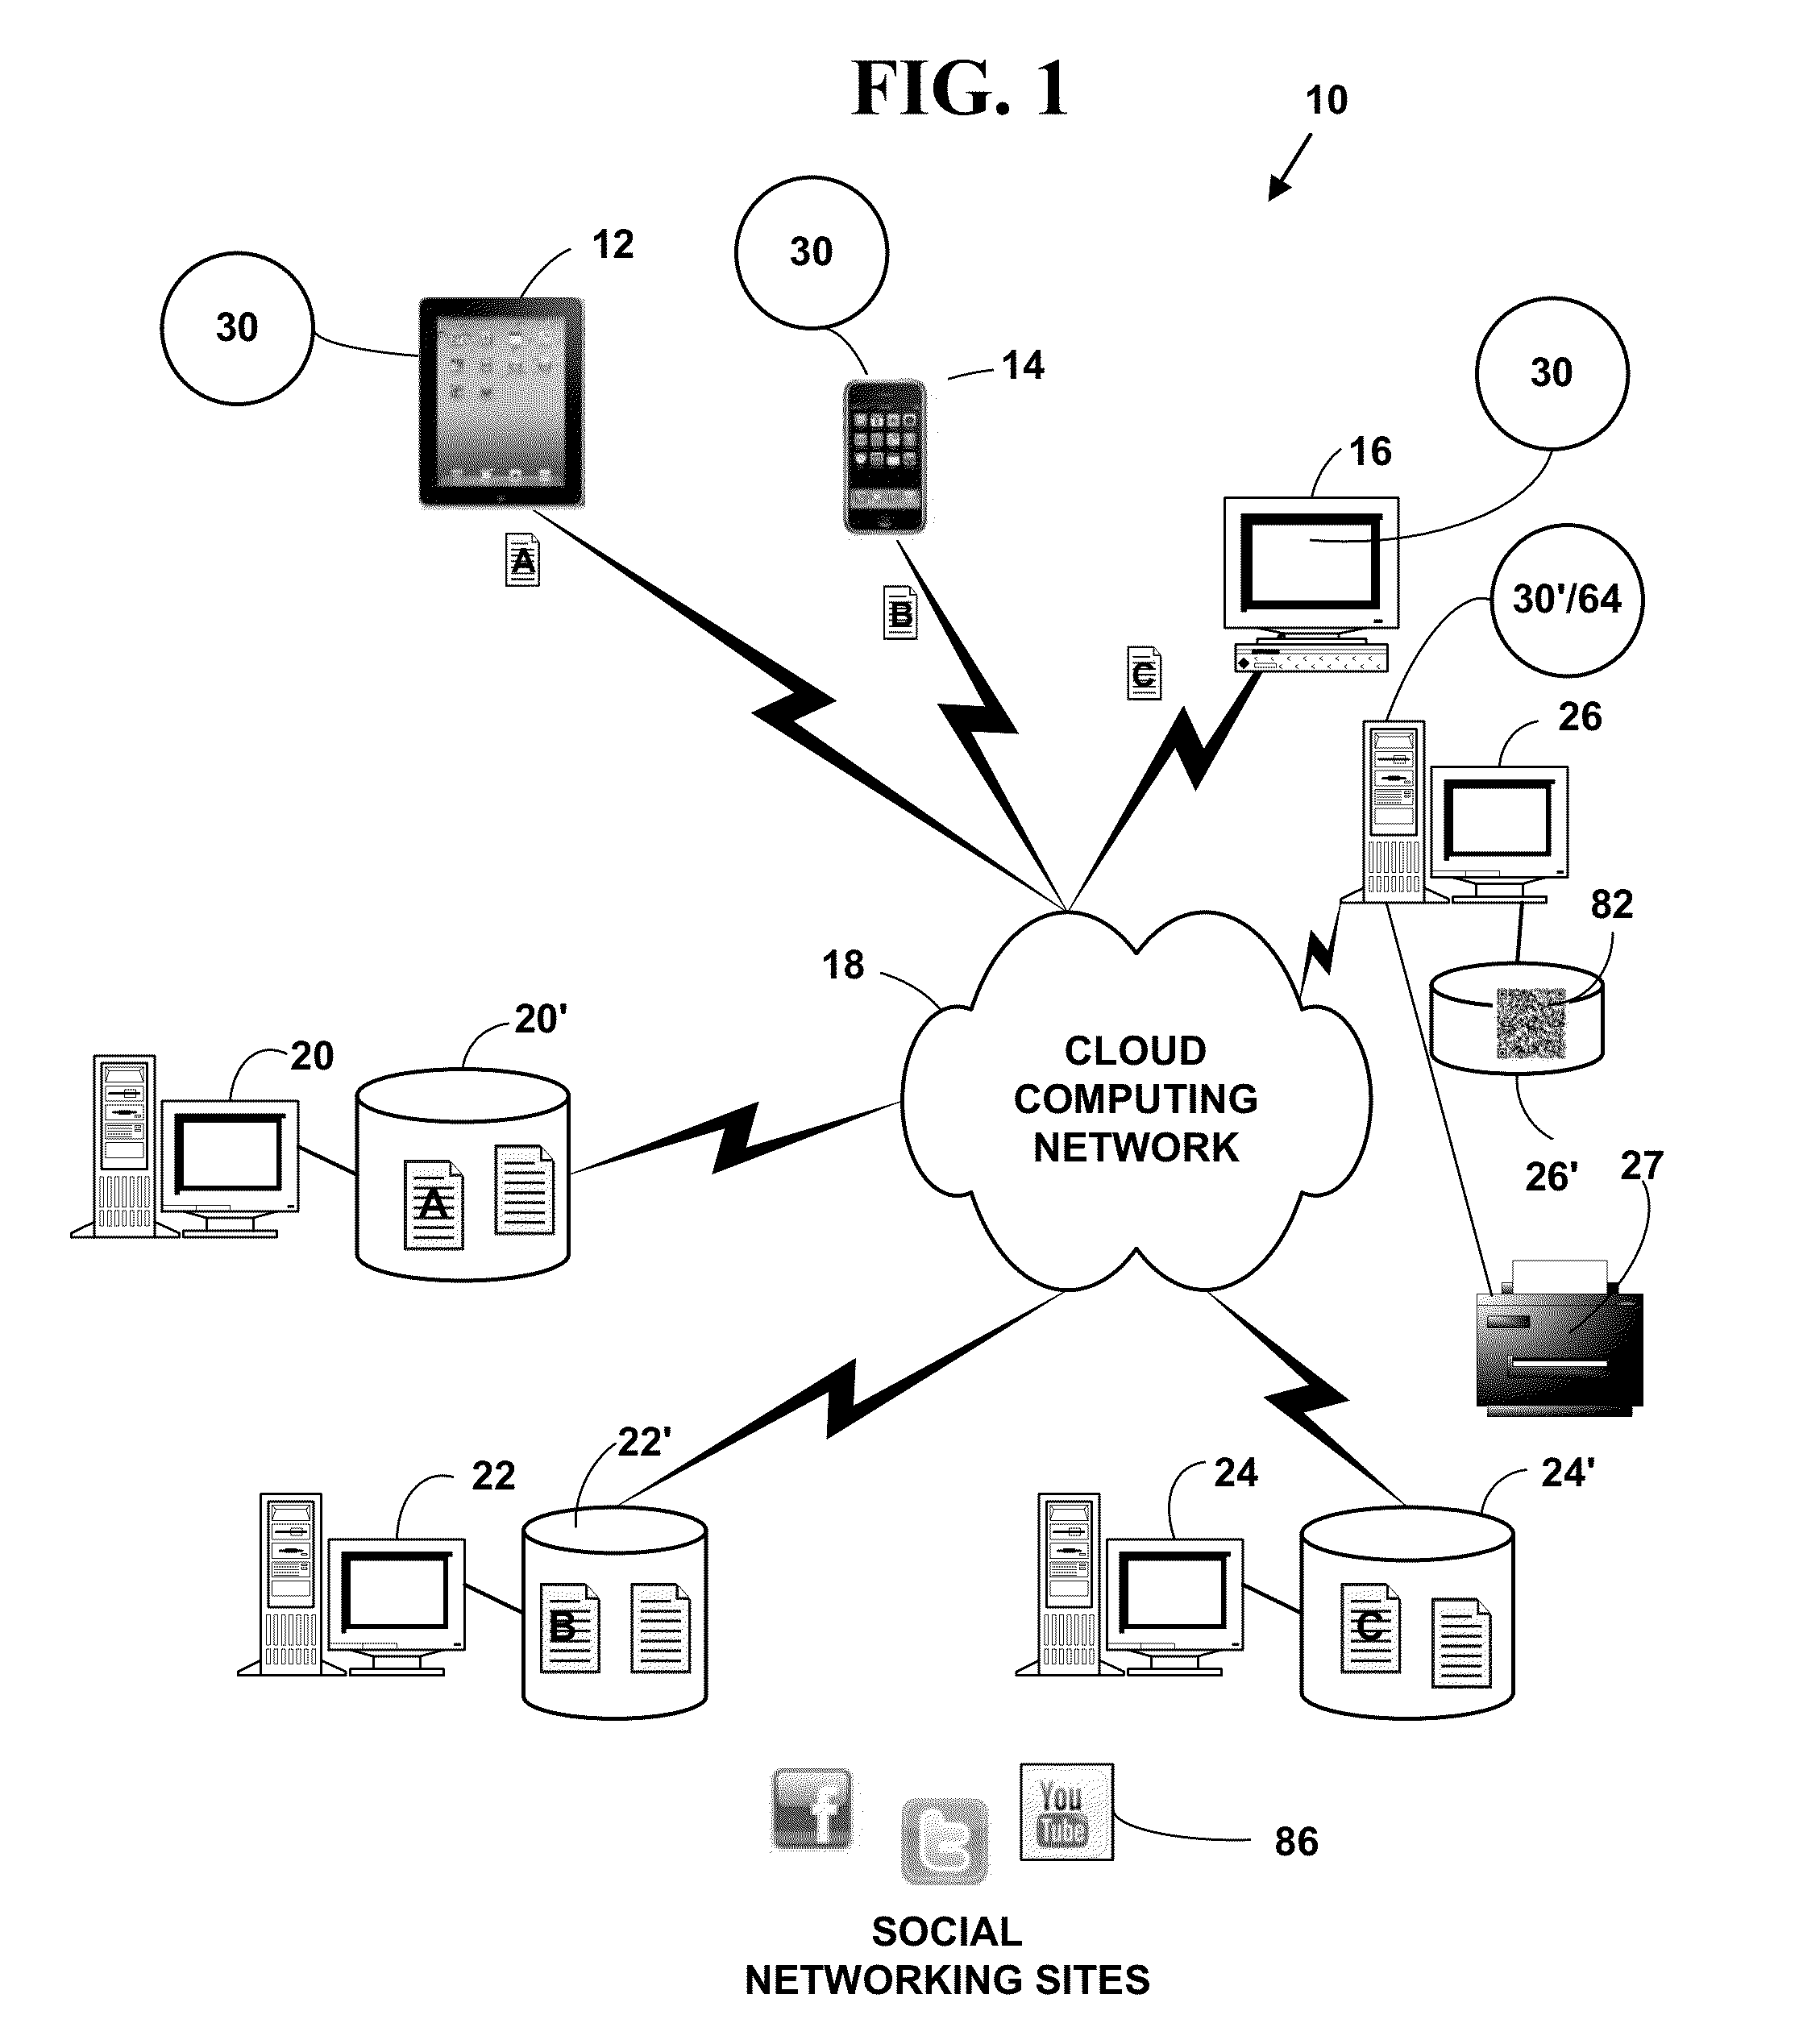 Method and system for creating electronic business referrals with cloud computing